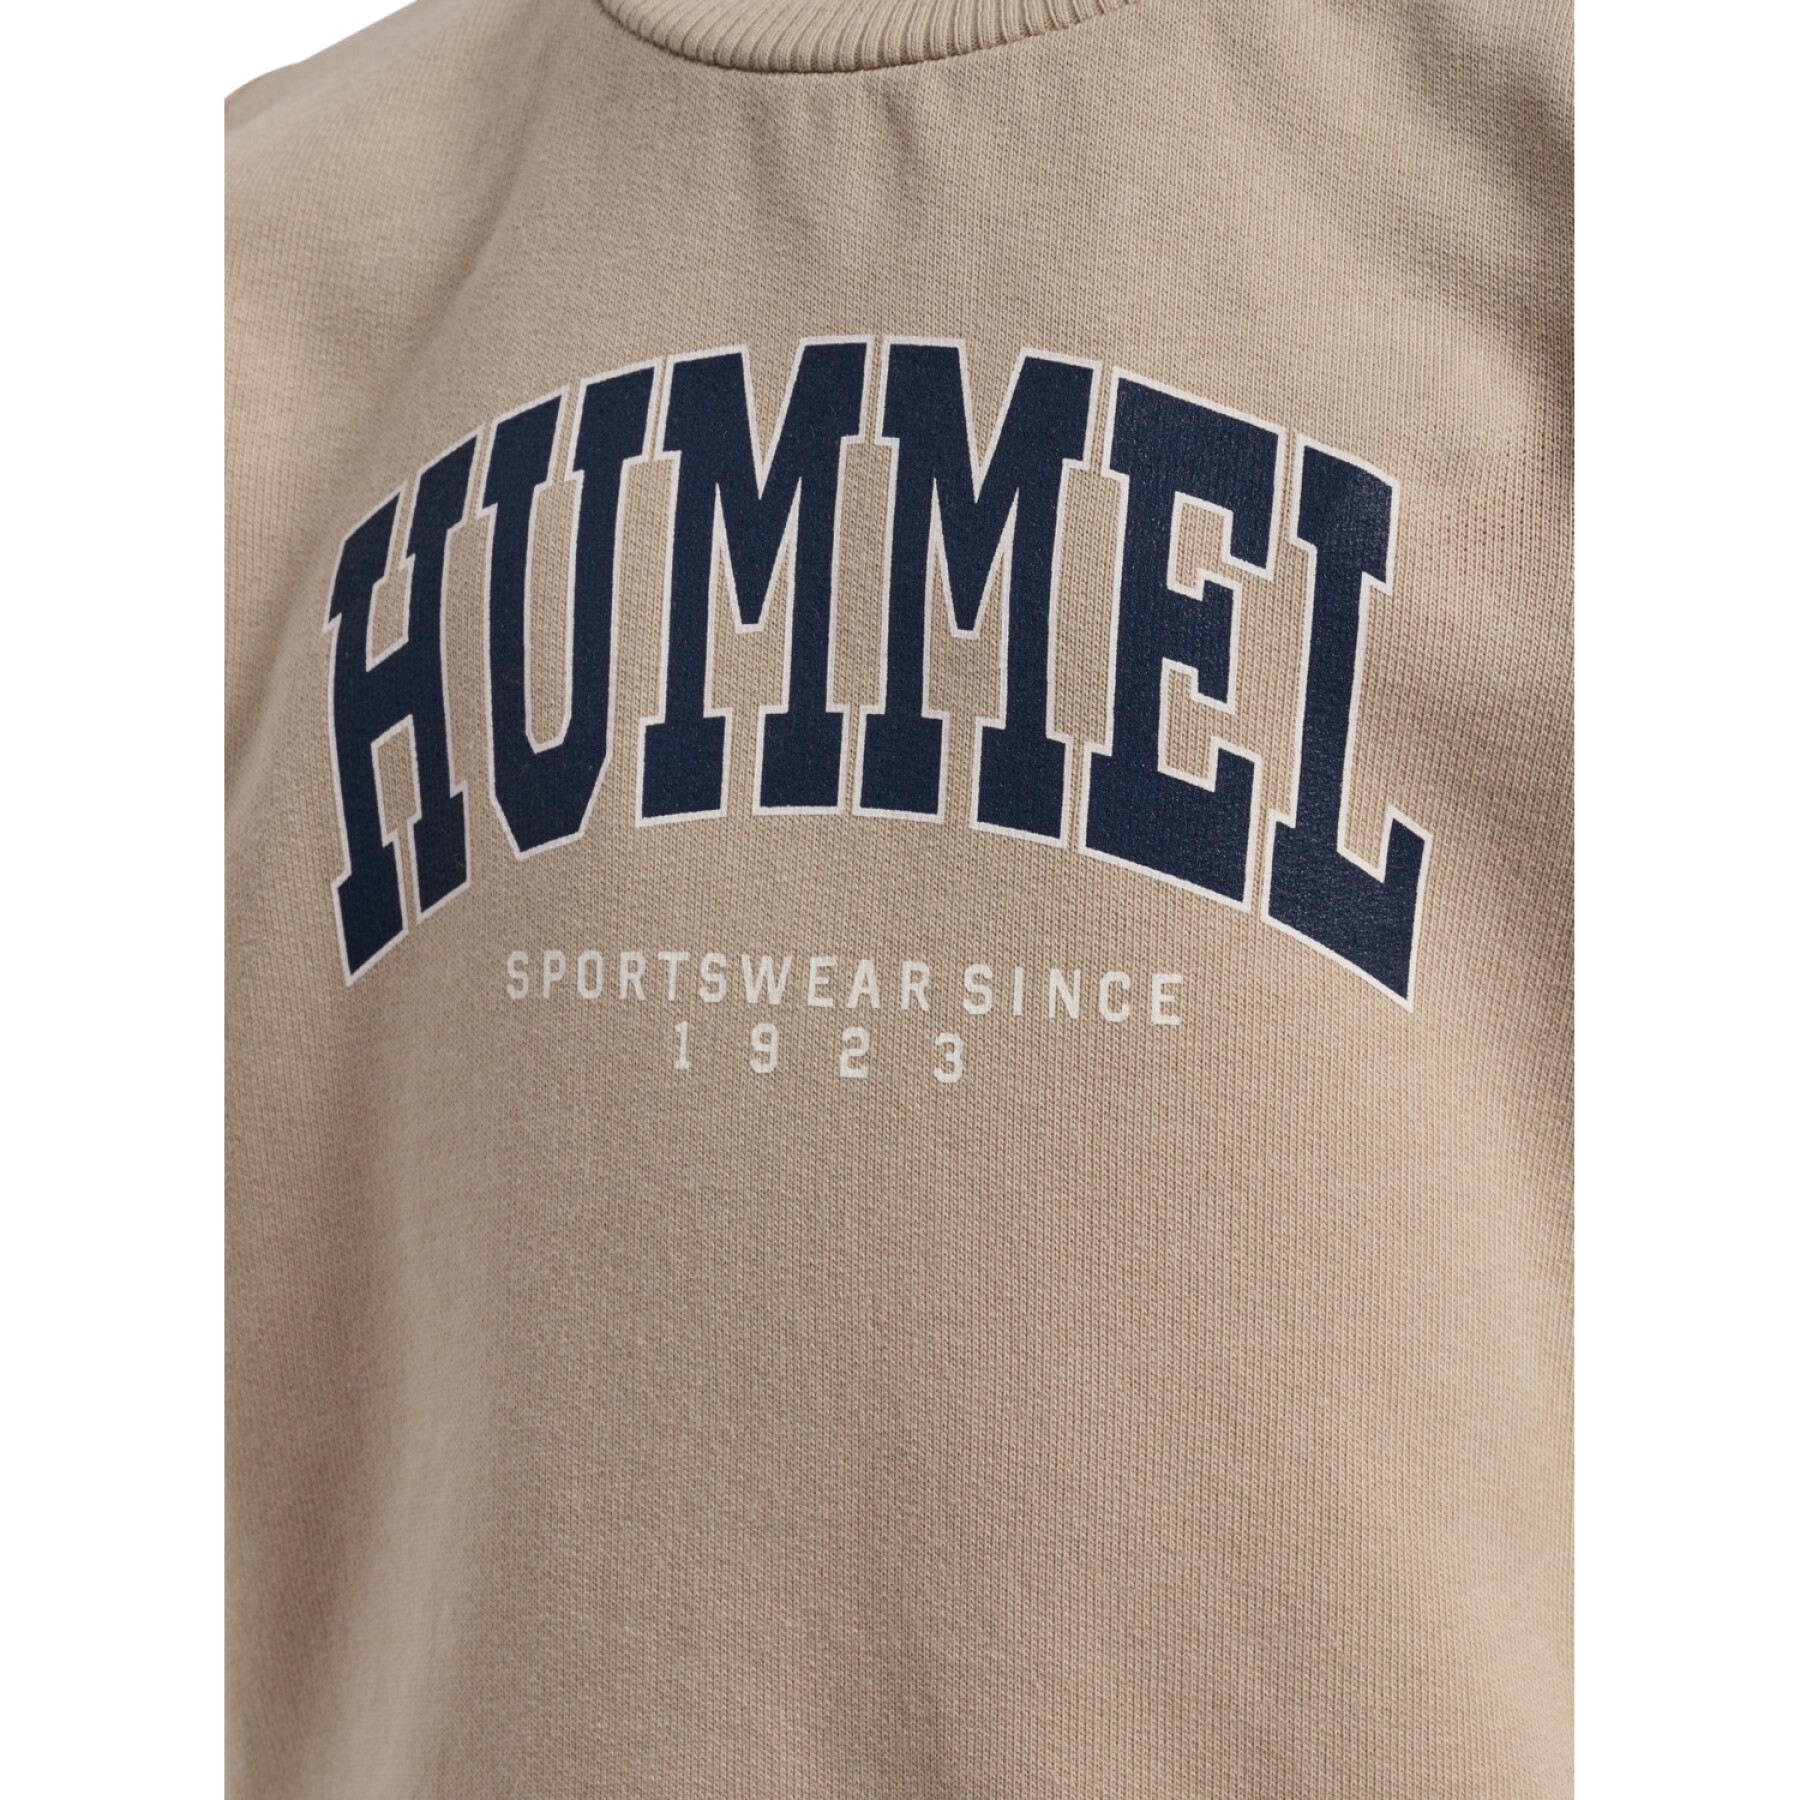 Baby sweater Hummel Fast Lime